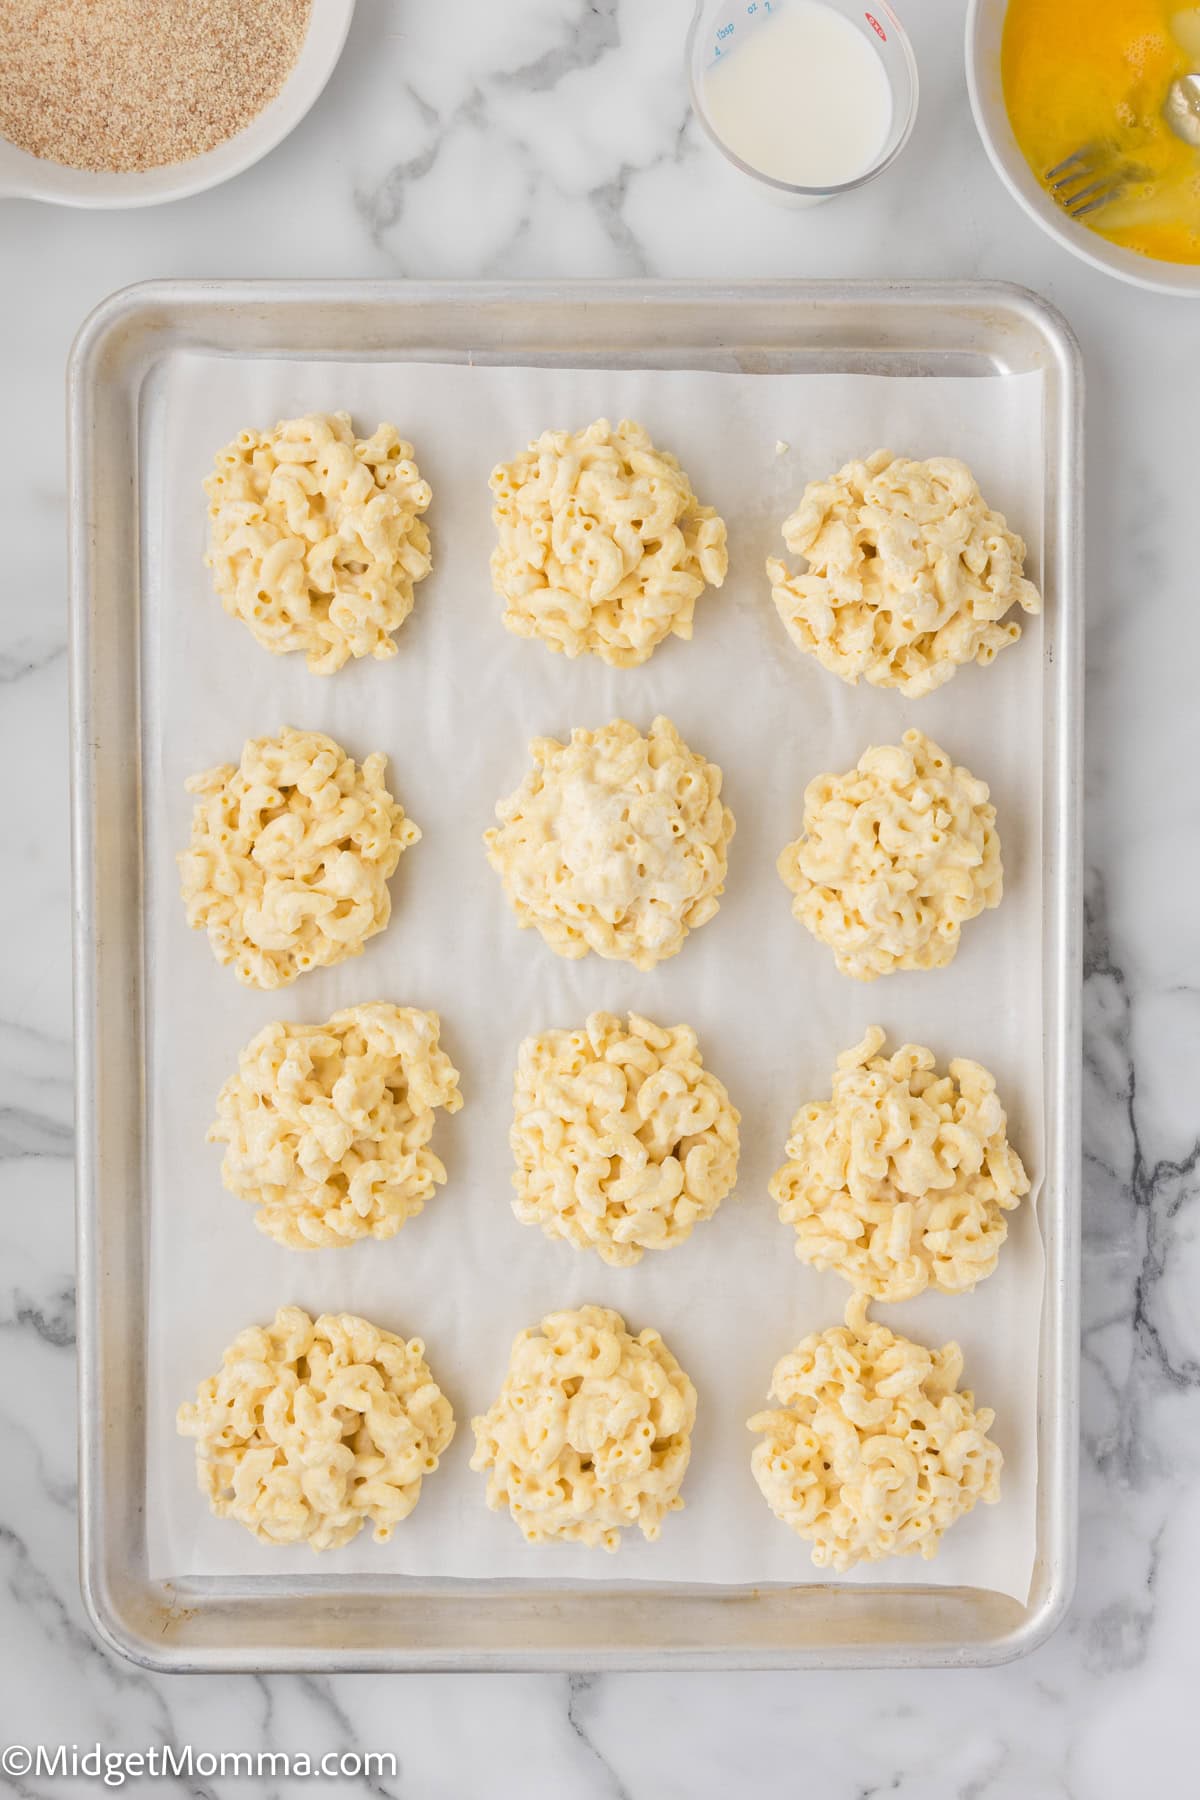 balls of macaroni and cheese on a baking sheet